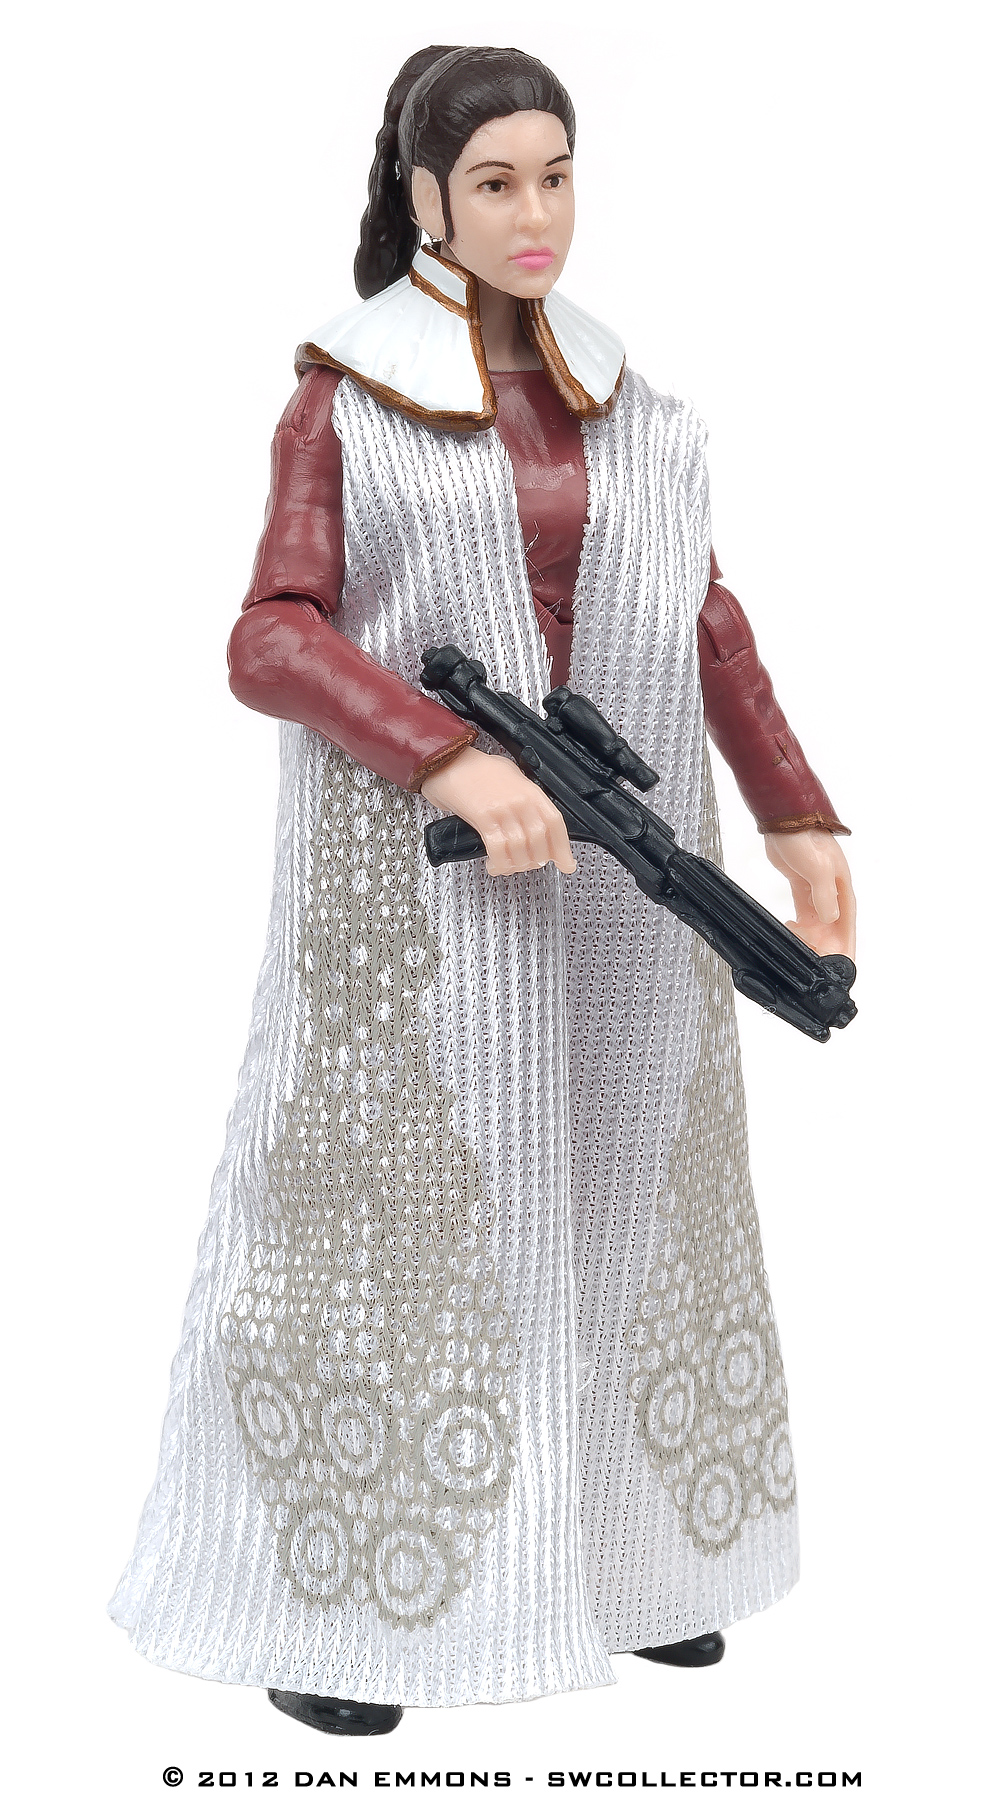 The Vintage Collection - Lost Line - EP5 05: Princess Leia